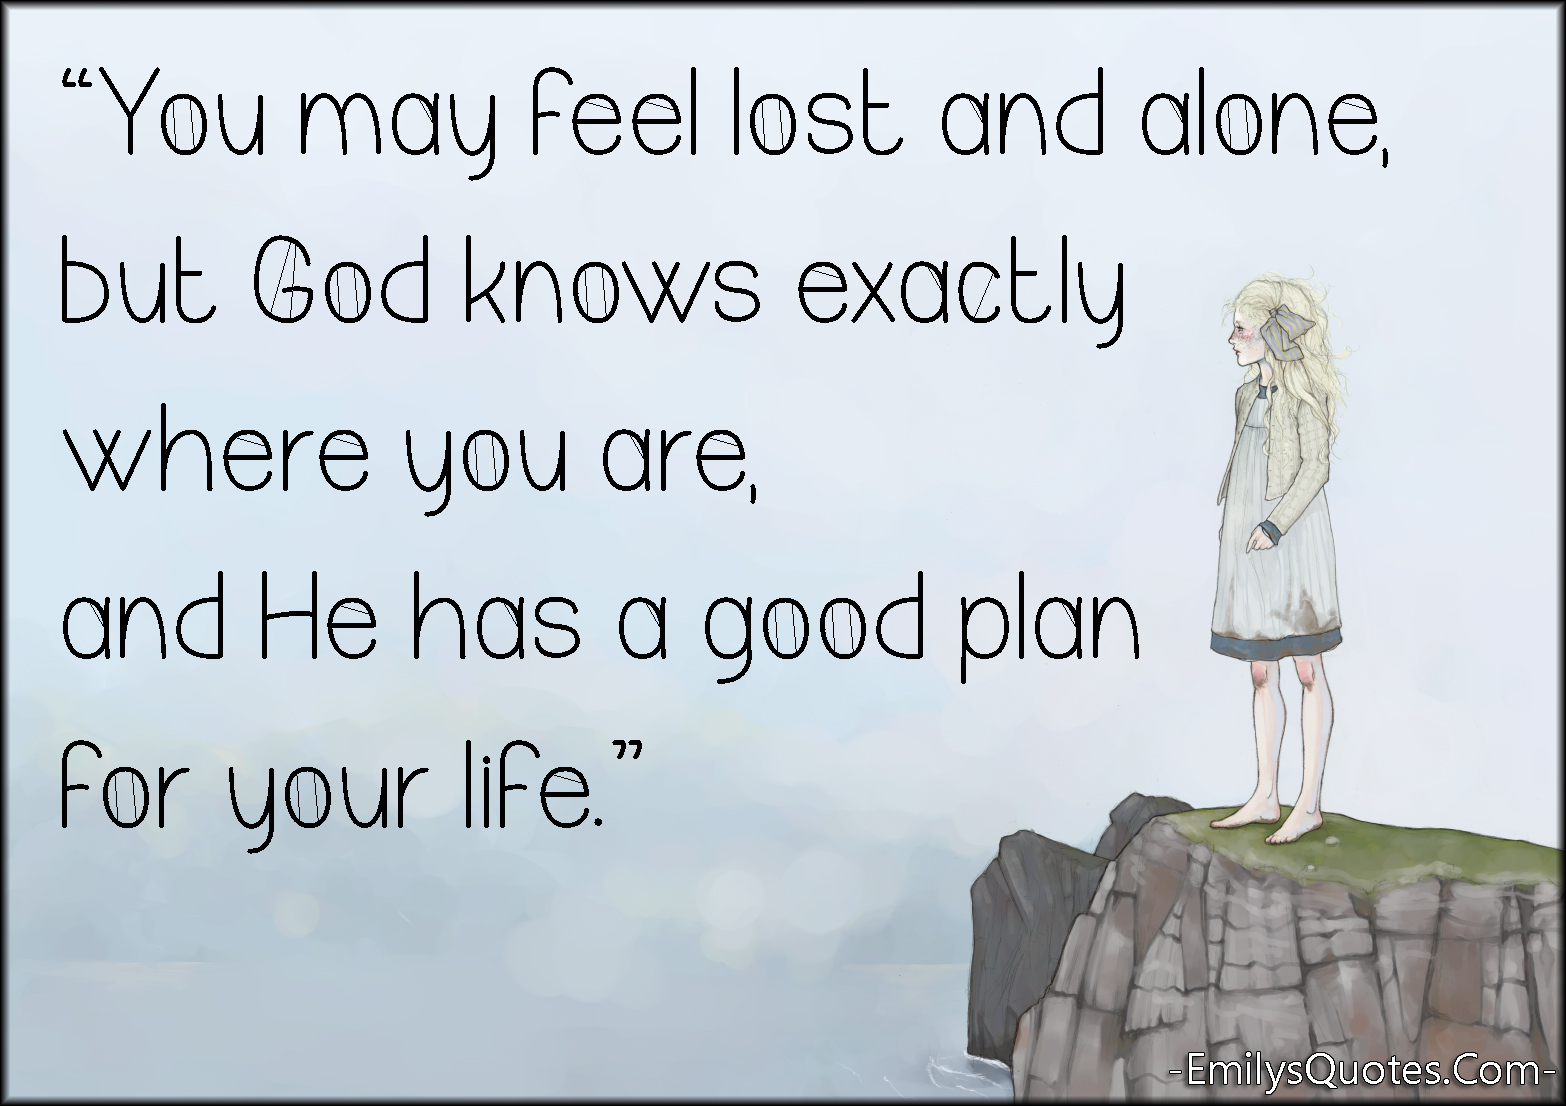 You may feel lost and alone, but God knows exactly where you are, and He has a good plan for your life